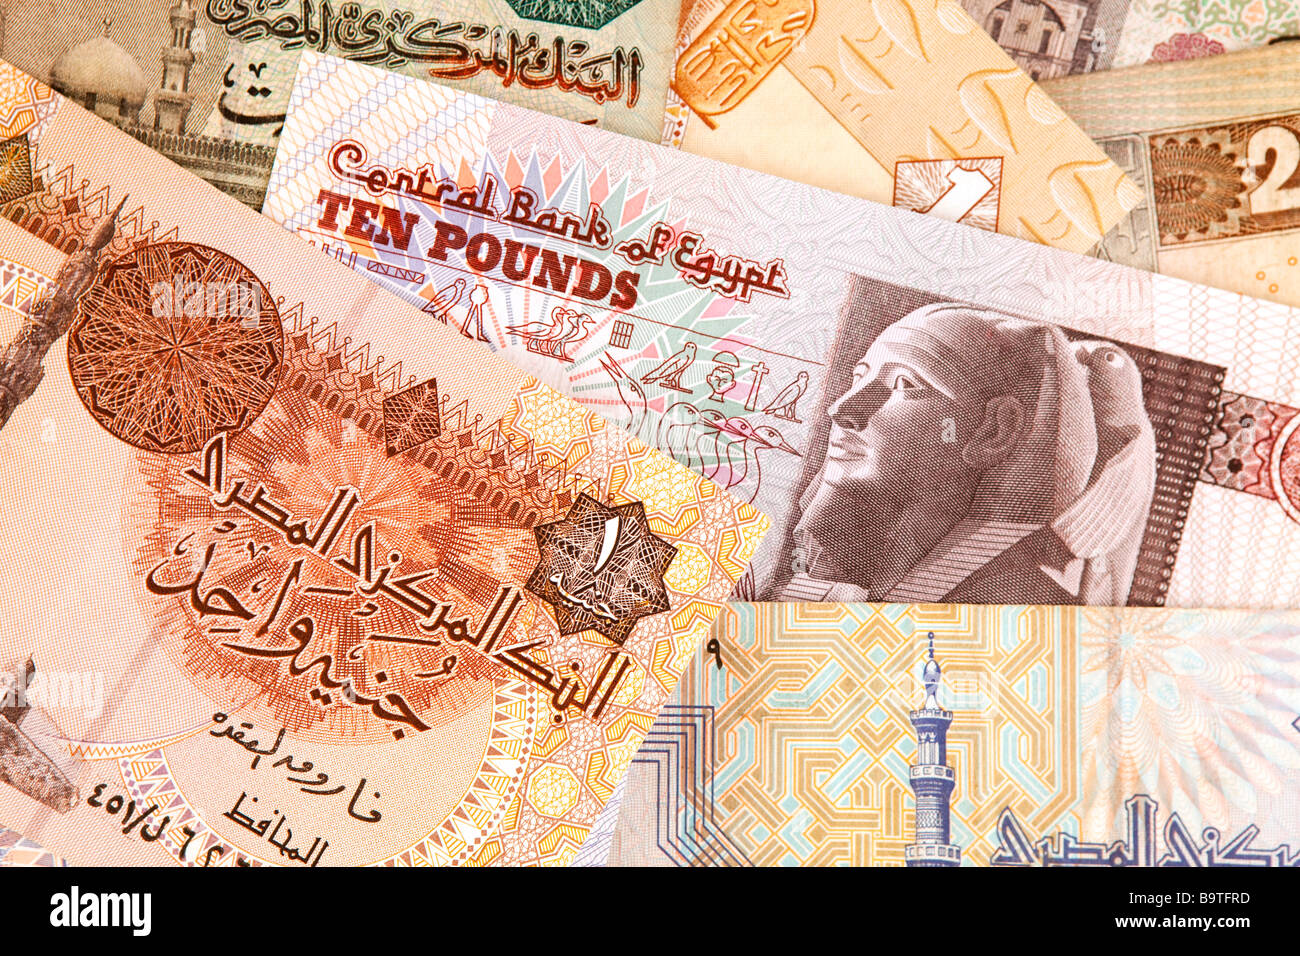 Money currency detail of Egyptian banknotes Stock Photo